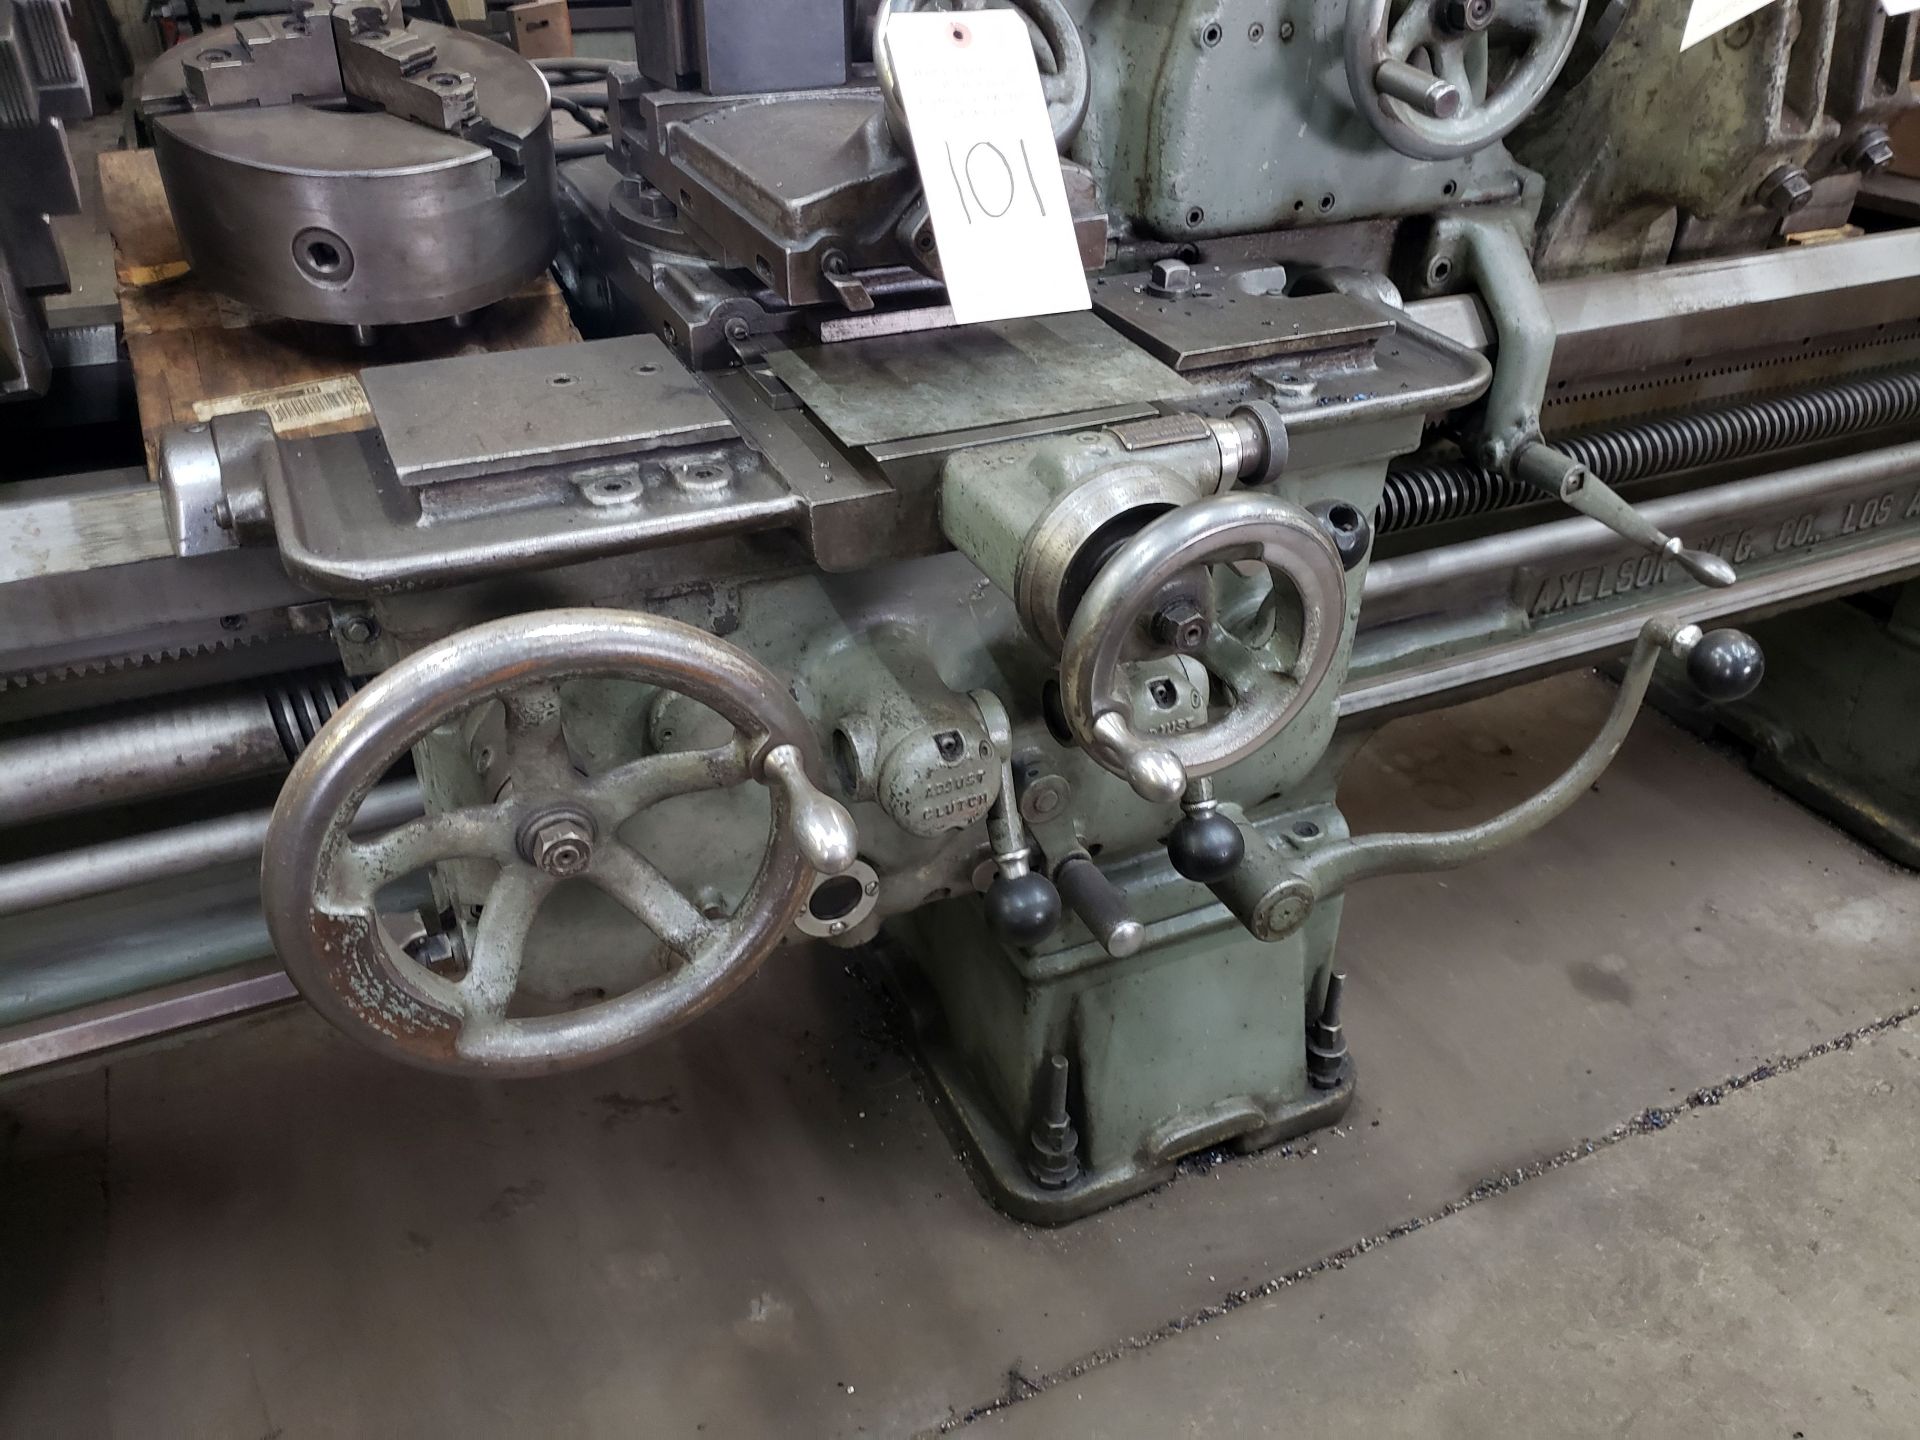 AXELSON 18"x69" LATHE 20.5" SWING, 10' BED LENGTH, 72" CENTERS, 8-808 RPM SPINDLE SPEED, SN 3233, - Image 7 of 10